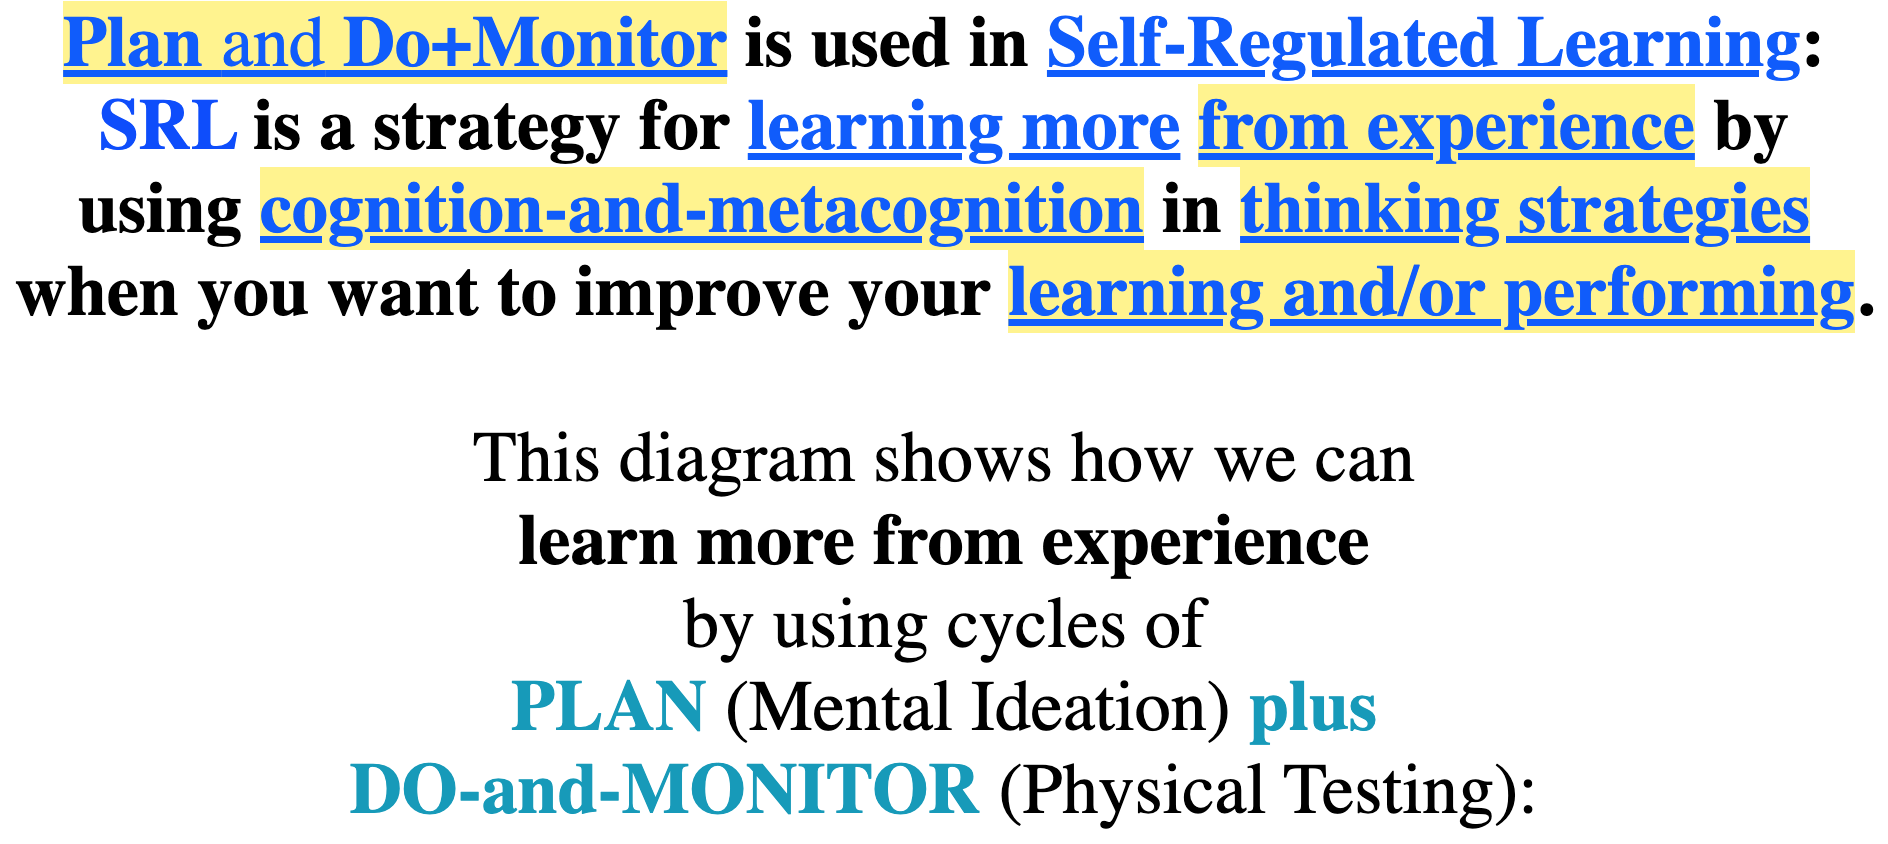 Plan-and-Do/Monitor -- similar to models of Self-Regulated Learning